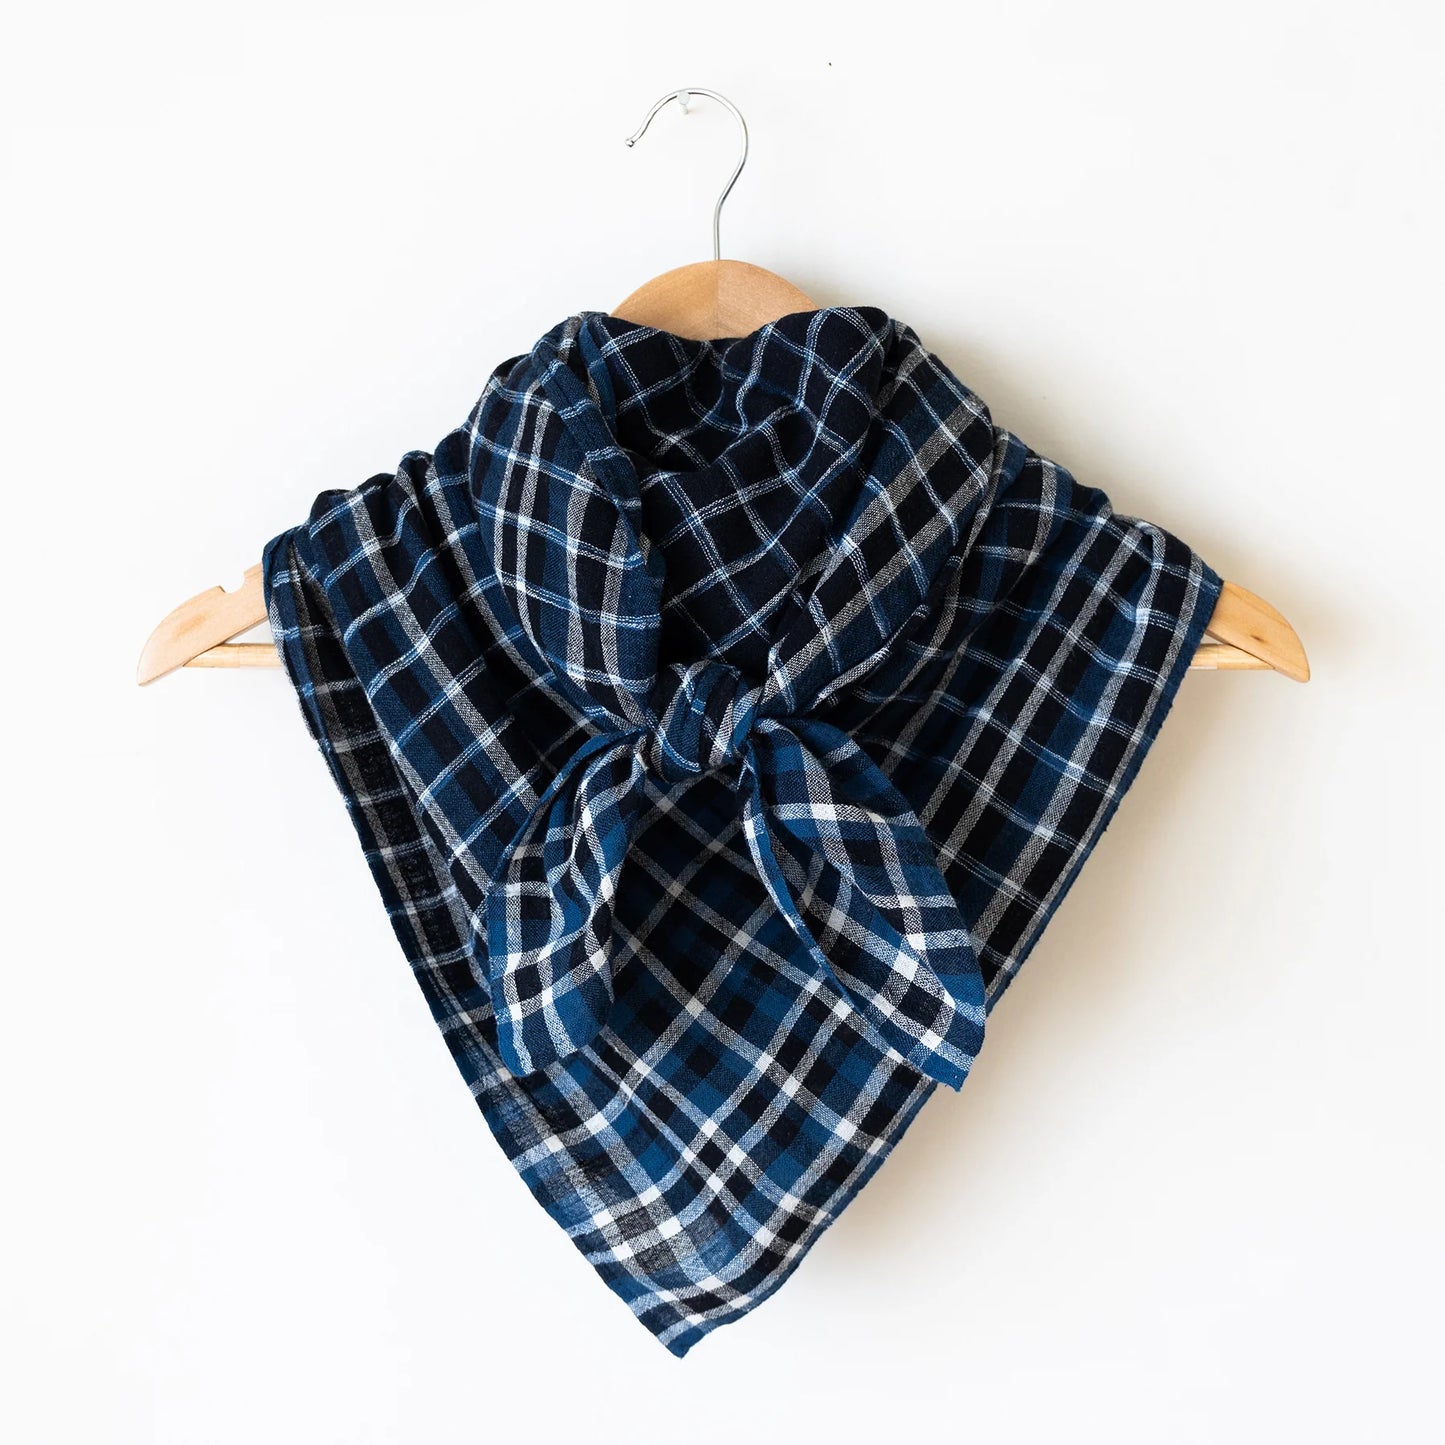 Handwoven Cowboy Scarf by Last Chance Textiles